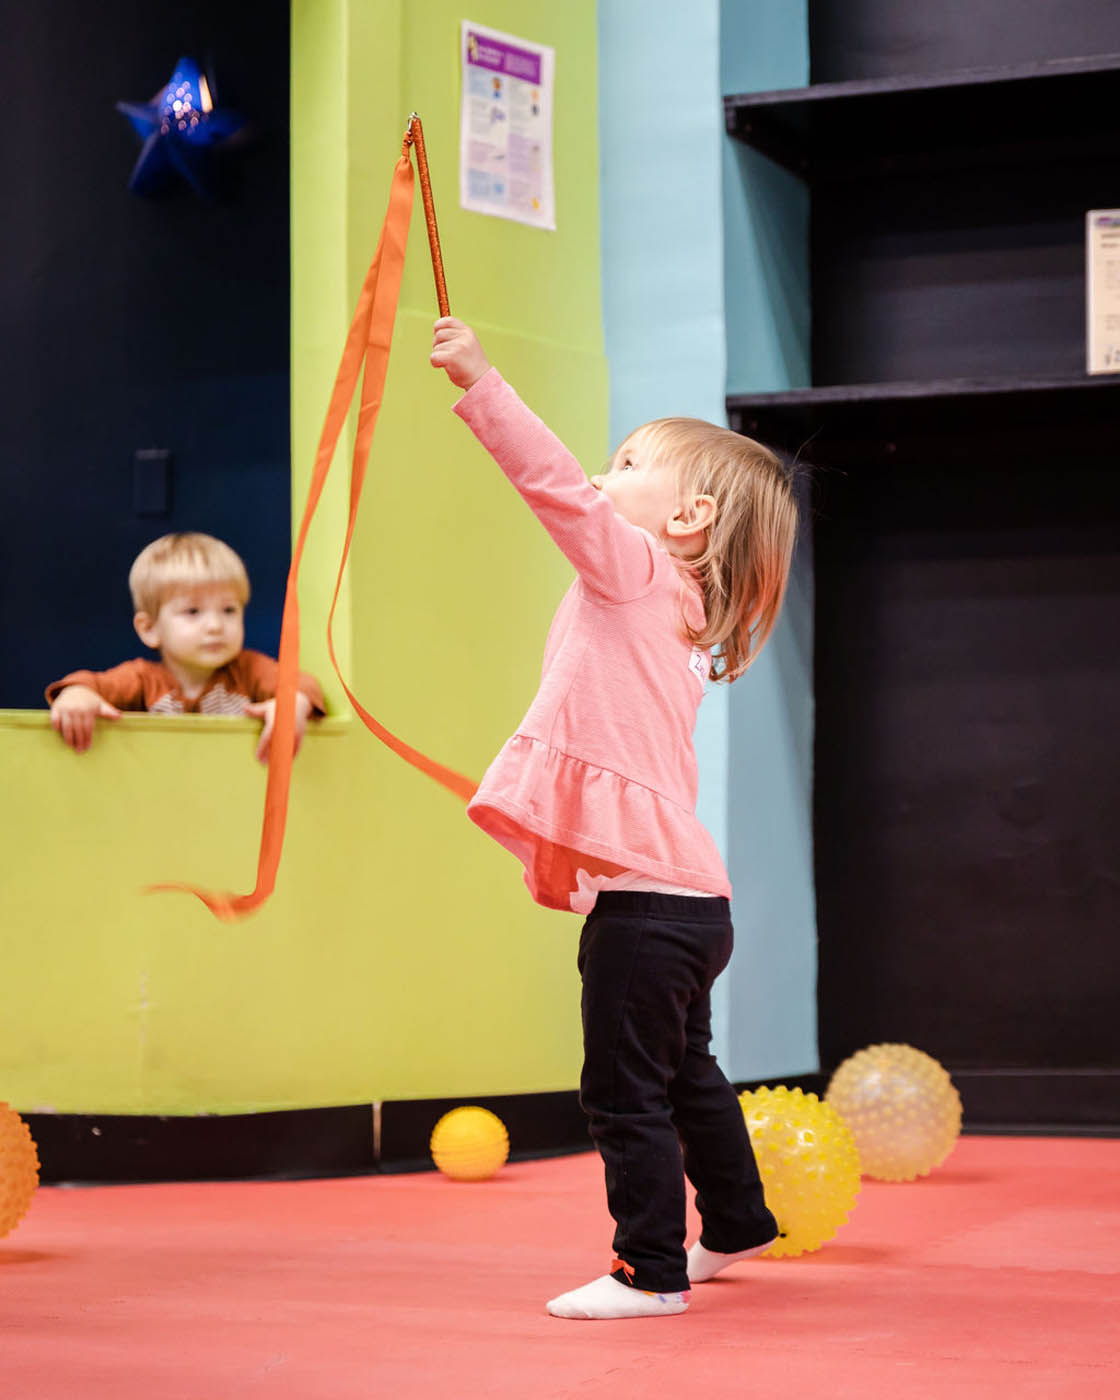 A little girl playing with ribbons and increasing her motor skills in sports classes with Romp n' Roll St. Petersburg.